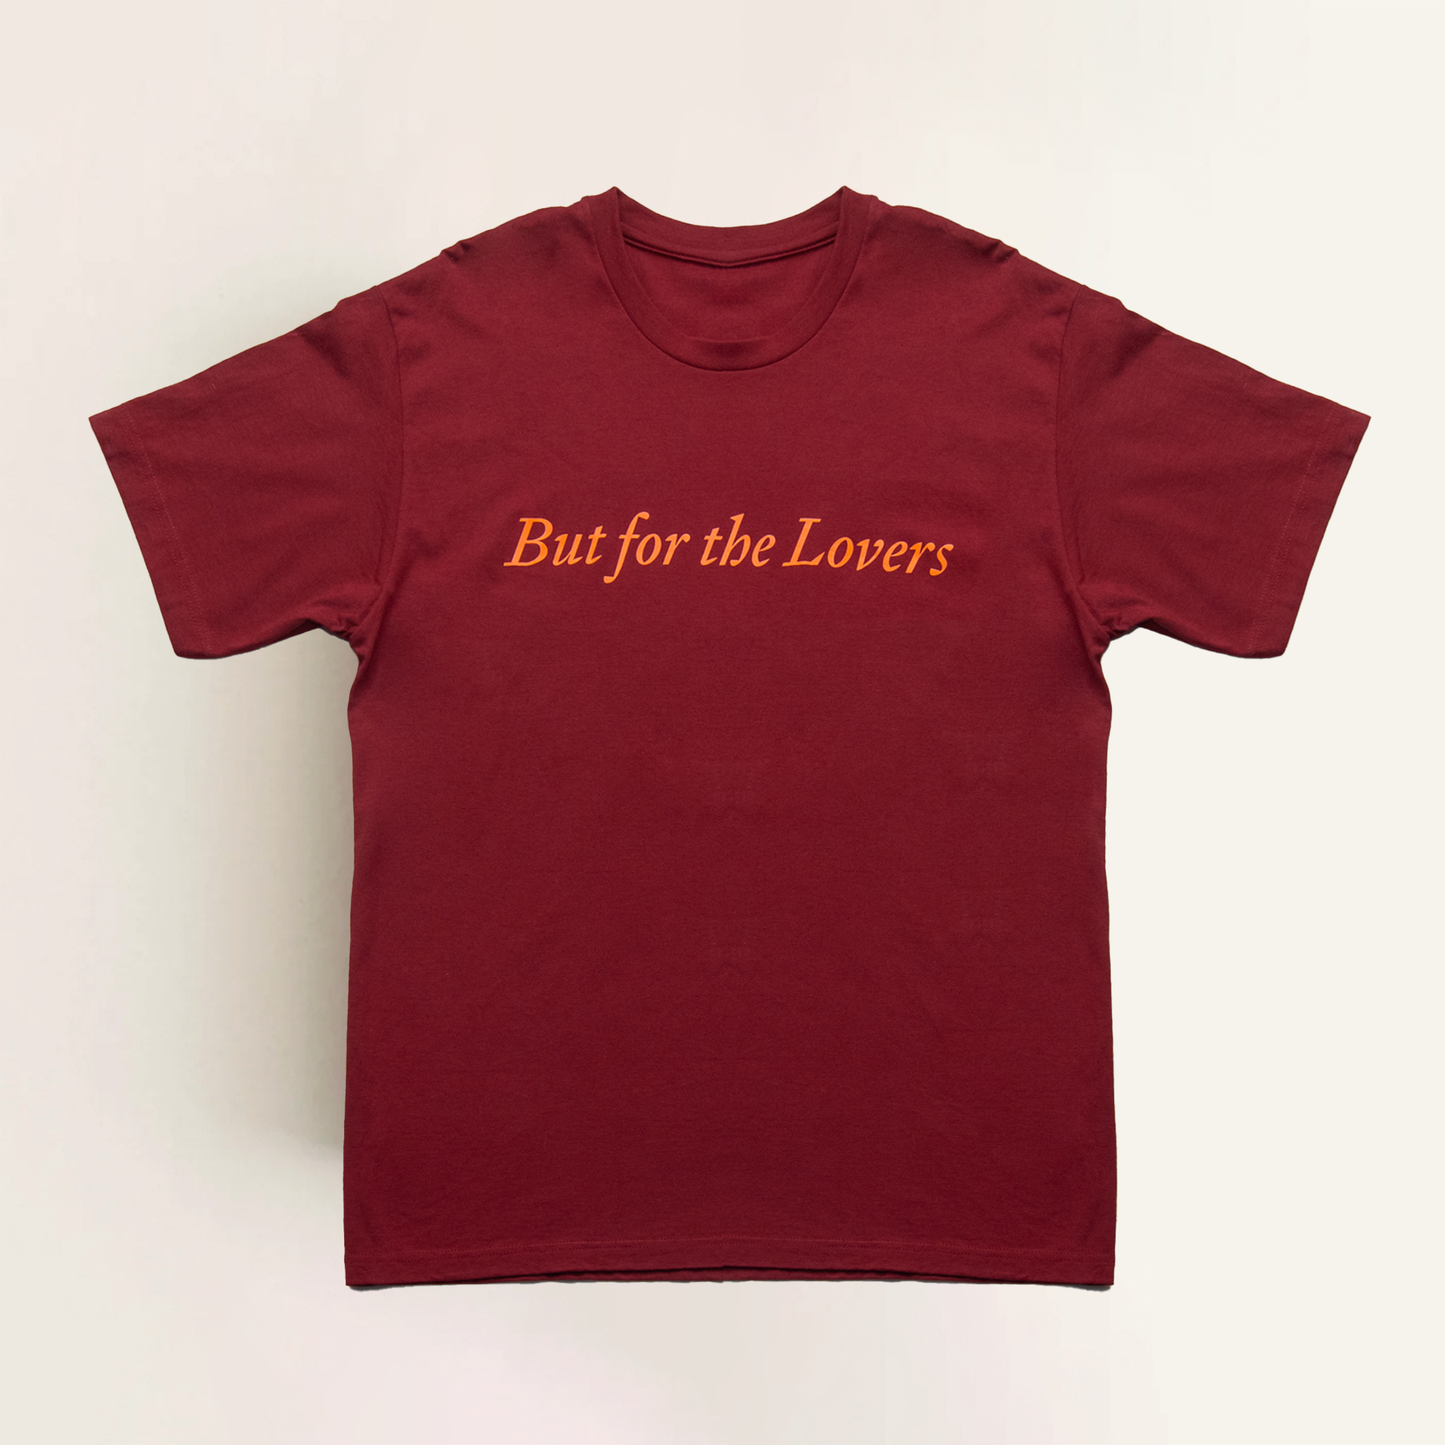 But for the Lovers T-Shirt